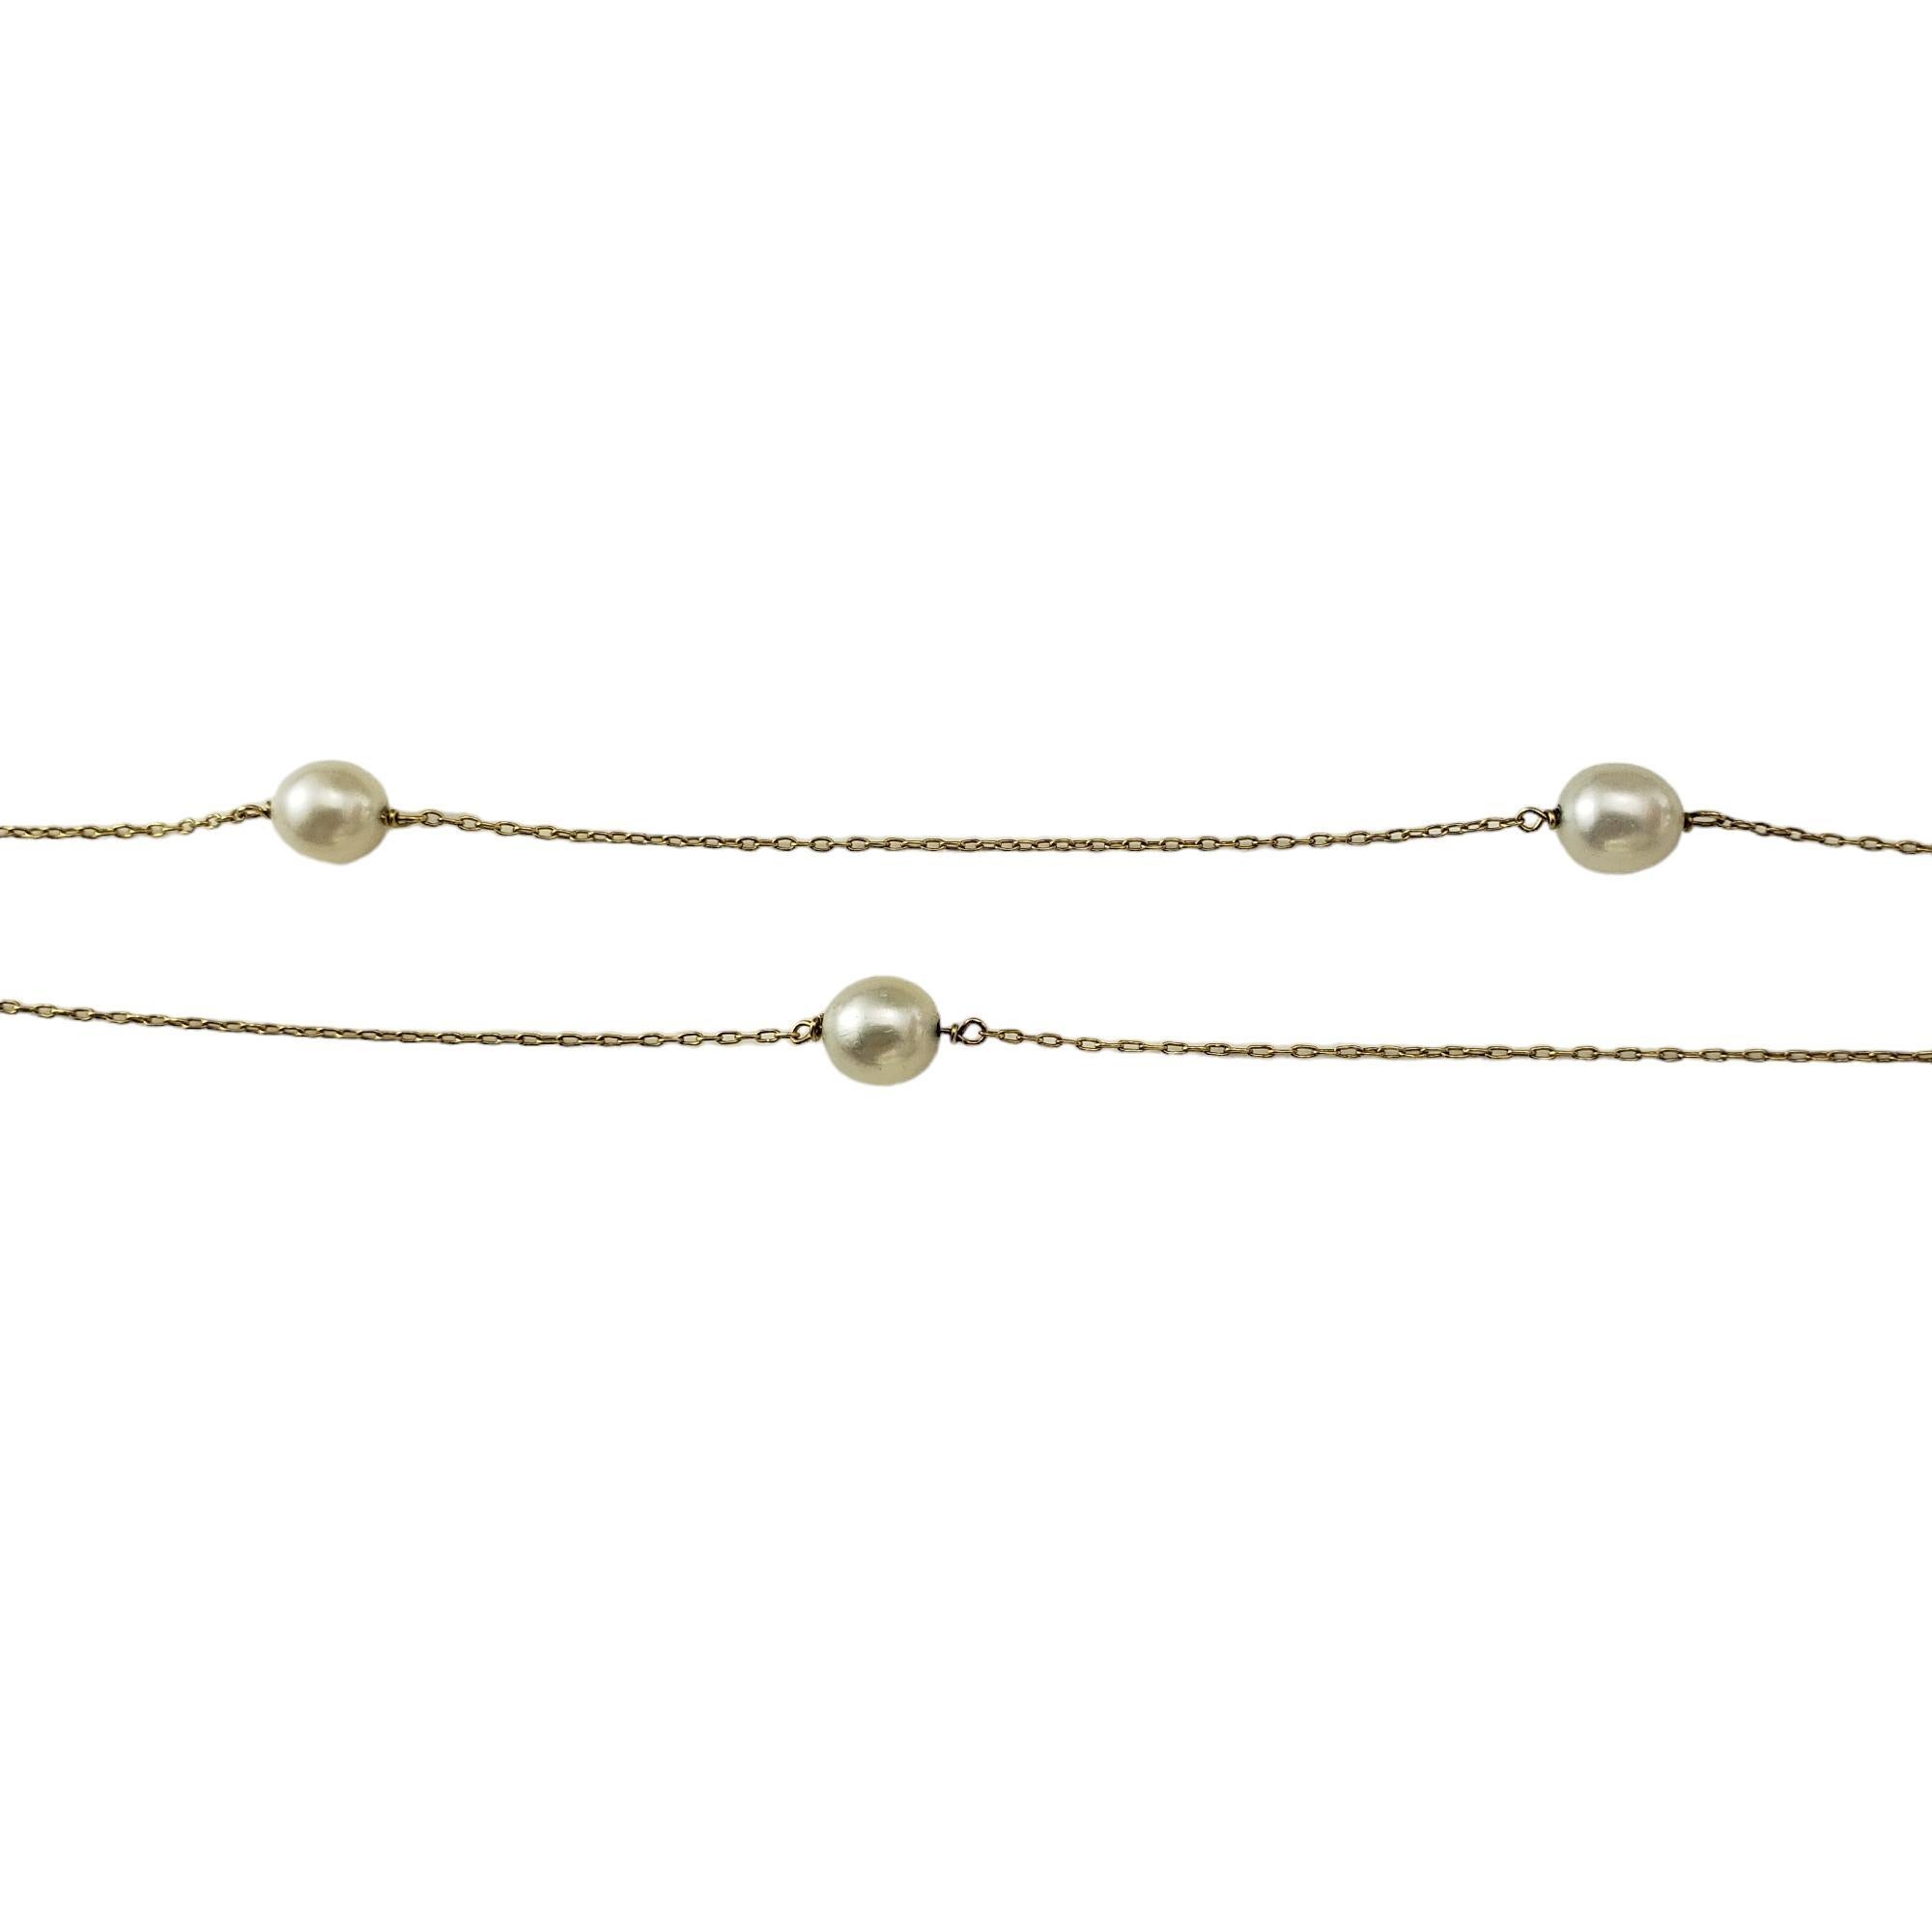 Tiffany & Co. Elsa Peretti 18K Yellow Gold Pearls by the Yard Necklace

This stunning station necklace features 14 white freshwater pearls (7-7.5 mm each) set on a delicate 18K yellow gold necklace.  By Elsa Peretti for Tiffany & Co. 

Size: 45